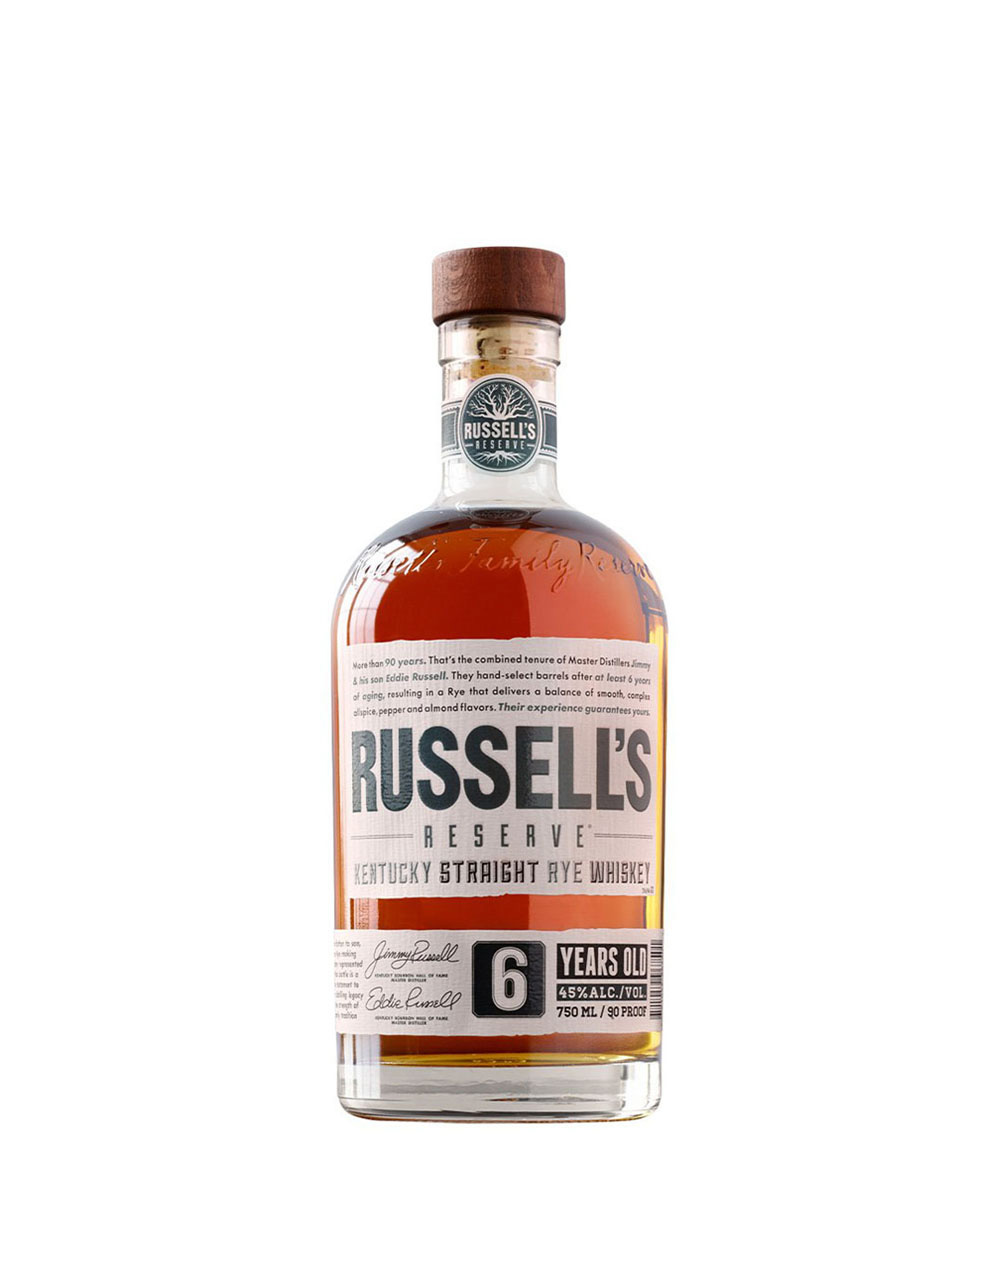 Russell's Reserve Rye 6 Year Old